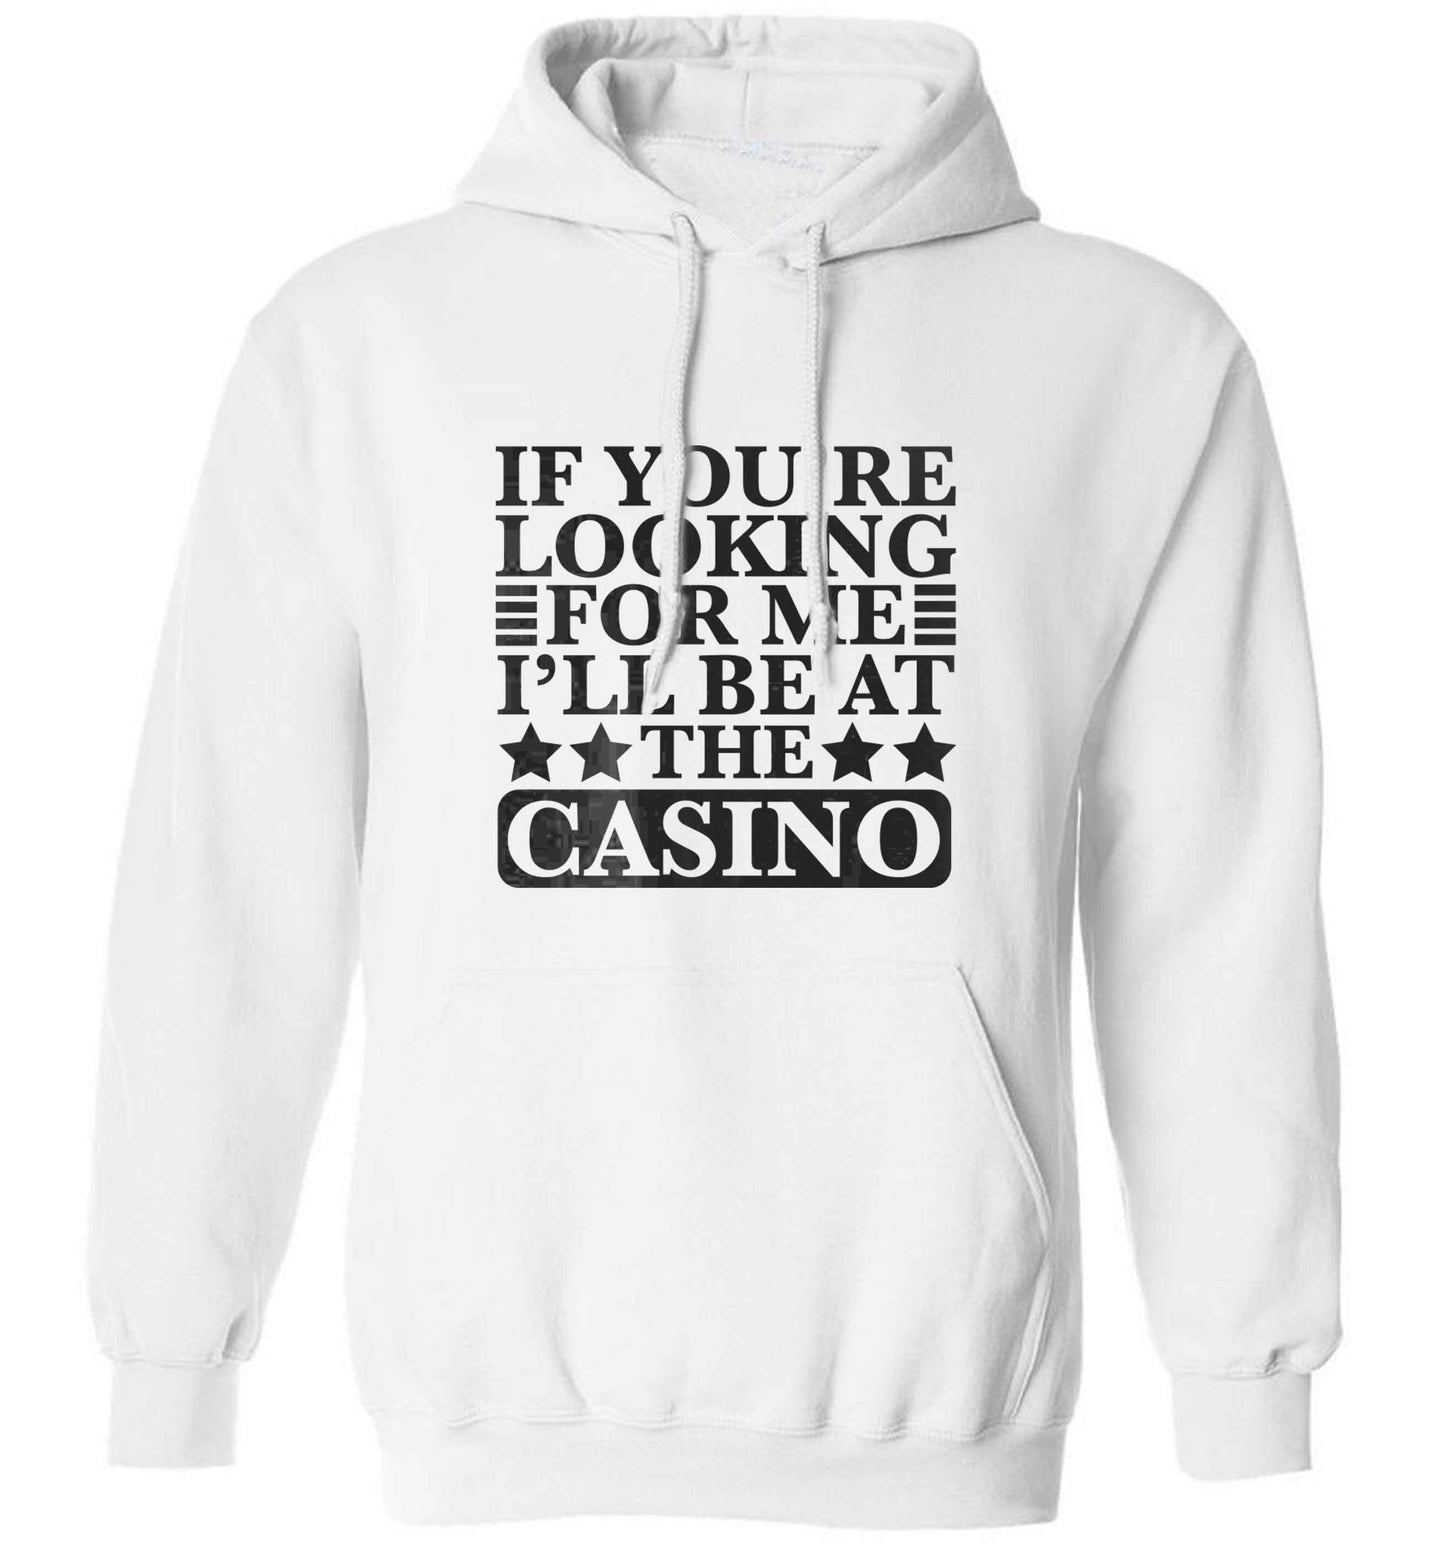 If you're looking for me I'll be at the casino adults unisex white hoodie 2XL